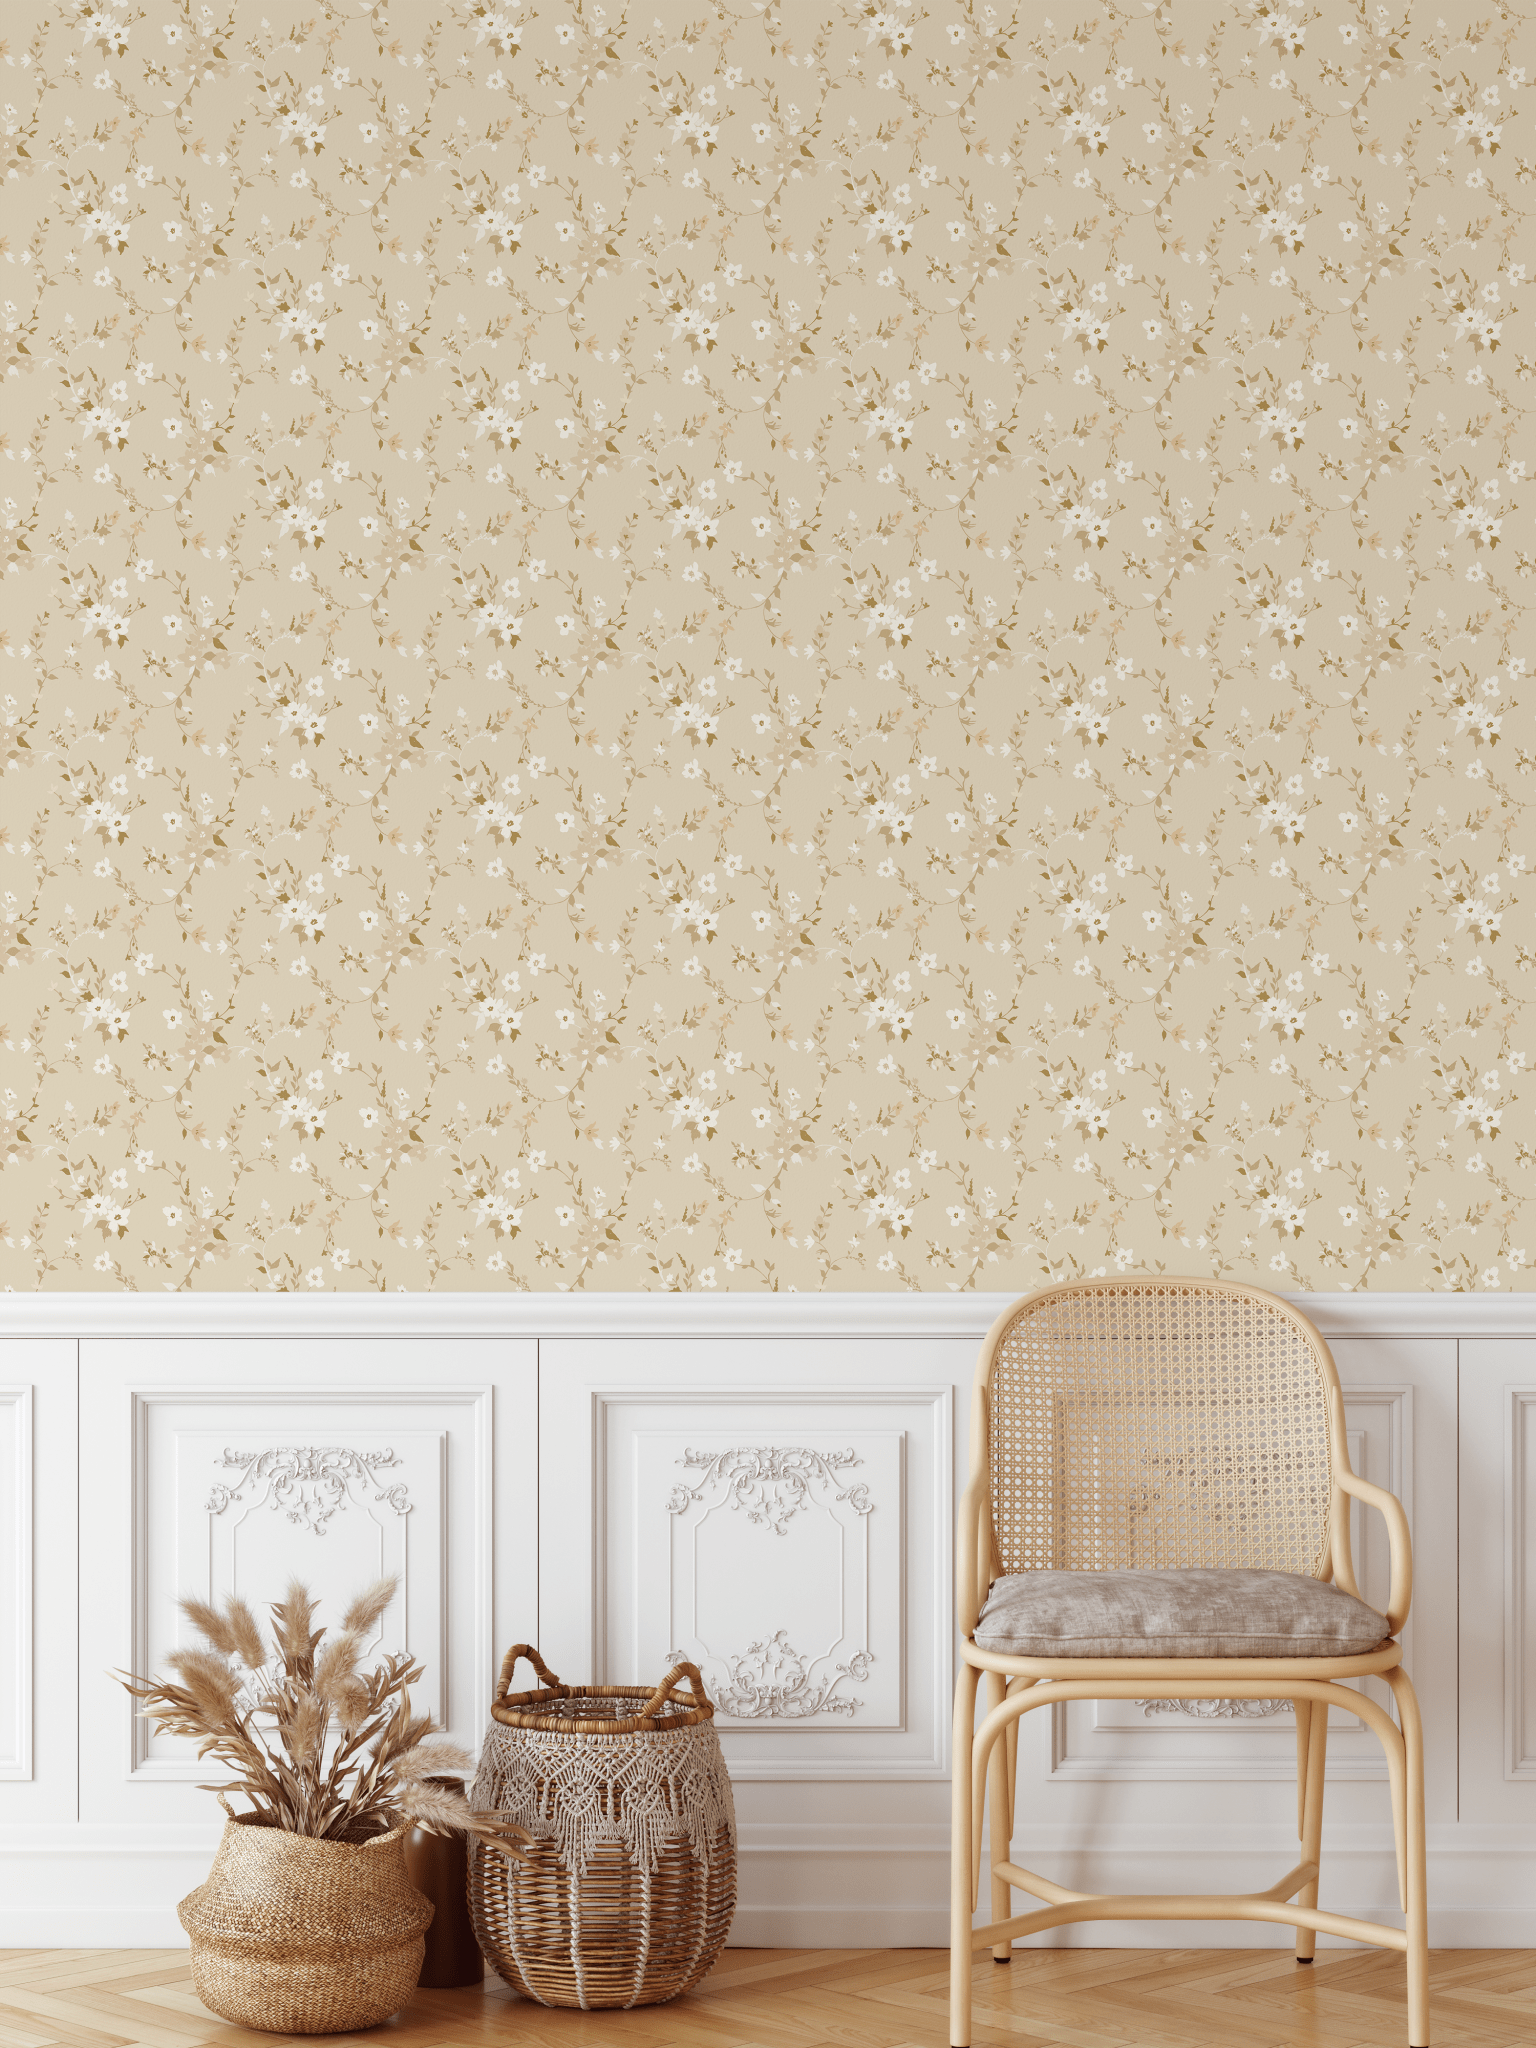 Golden florals against a neutral background create a timeless wallpaper perfect for sophisticated interior settings.